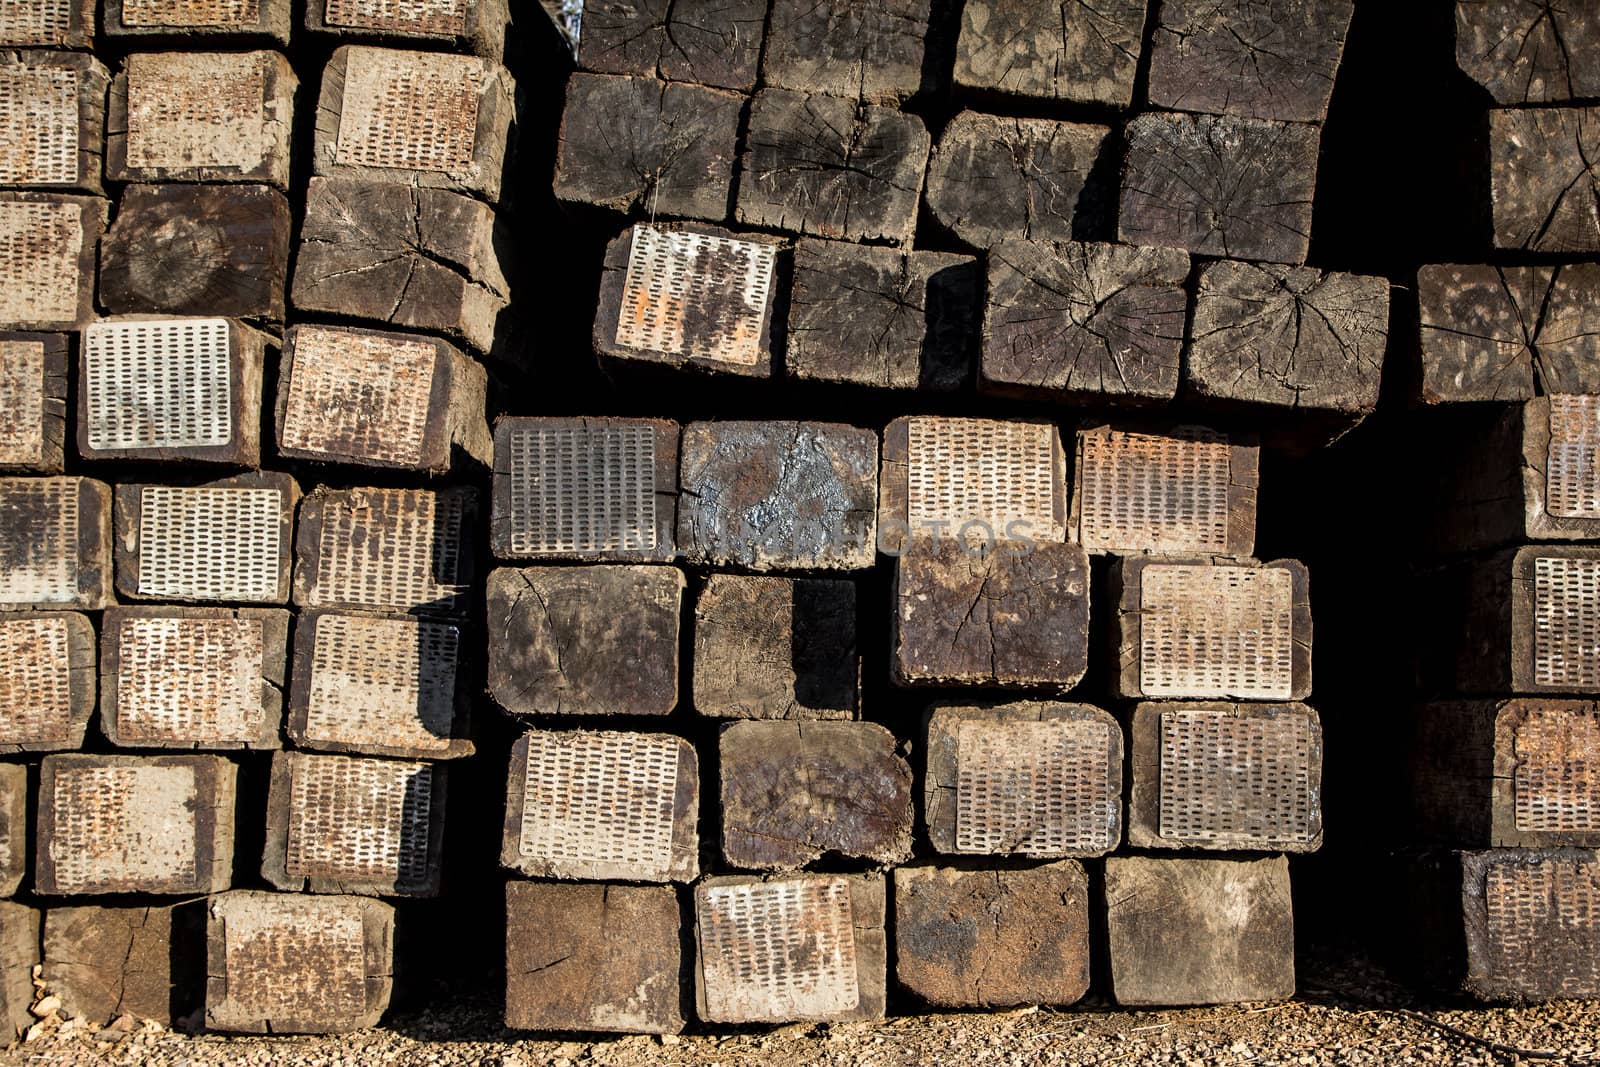 Stacked Railroad Ties Near the Side of the Tracks